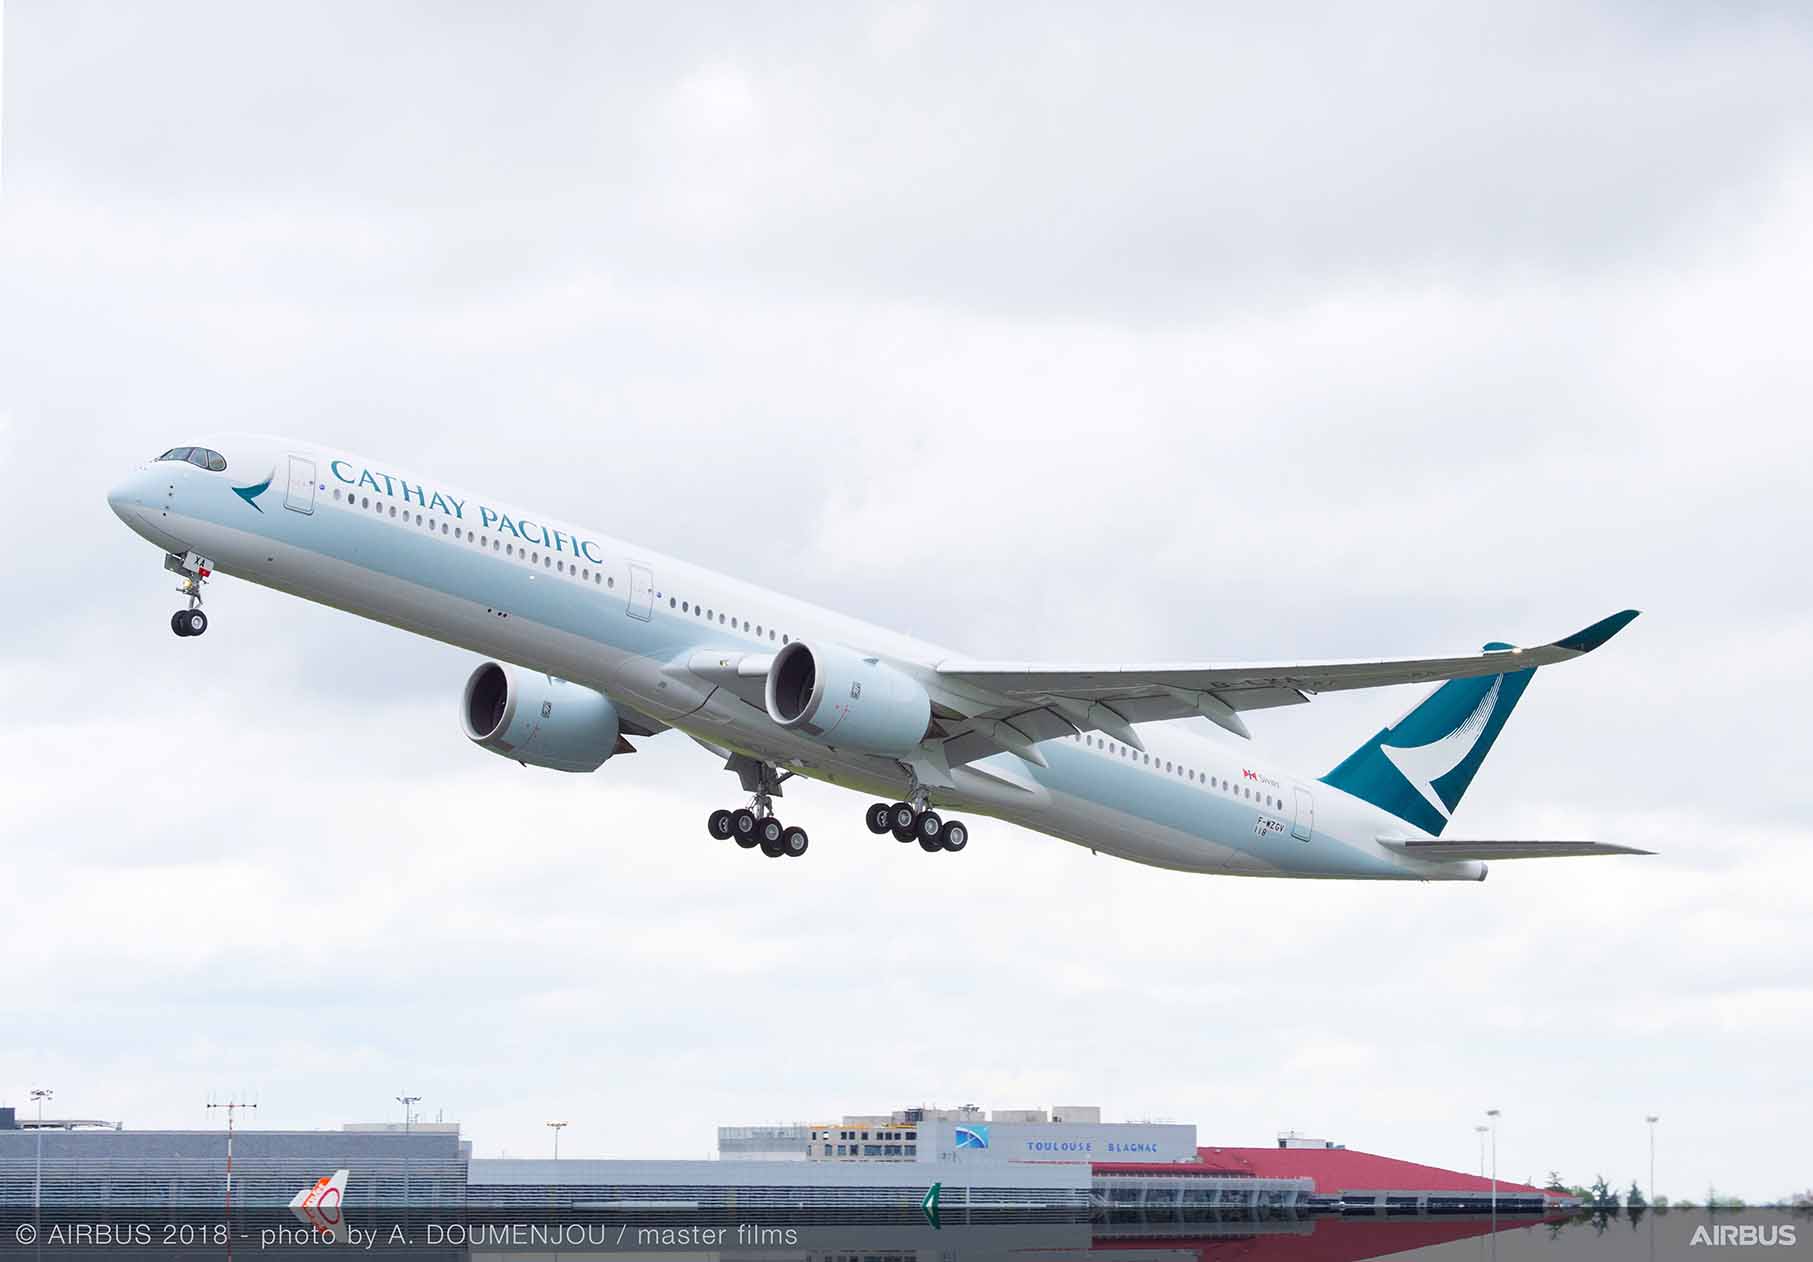 Cathay Pacific Group releases June 2019 traffic performance